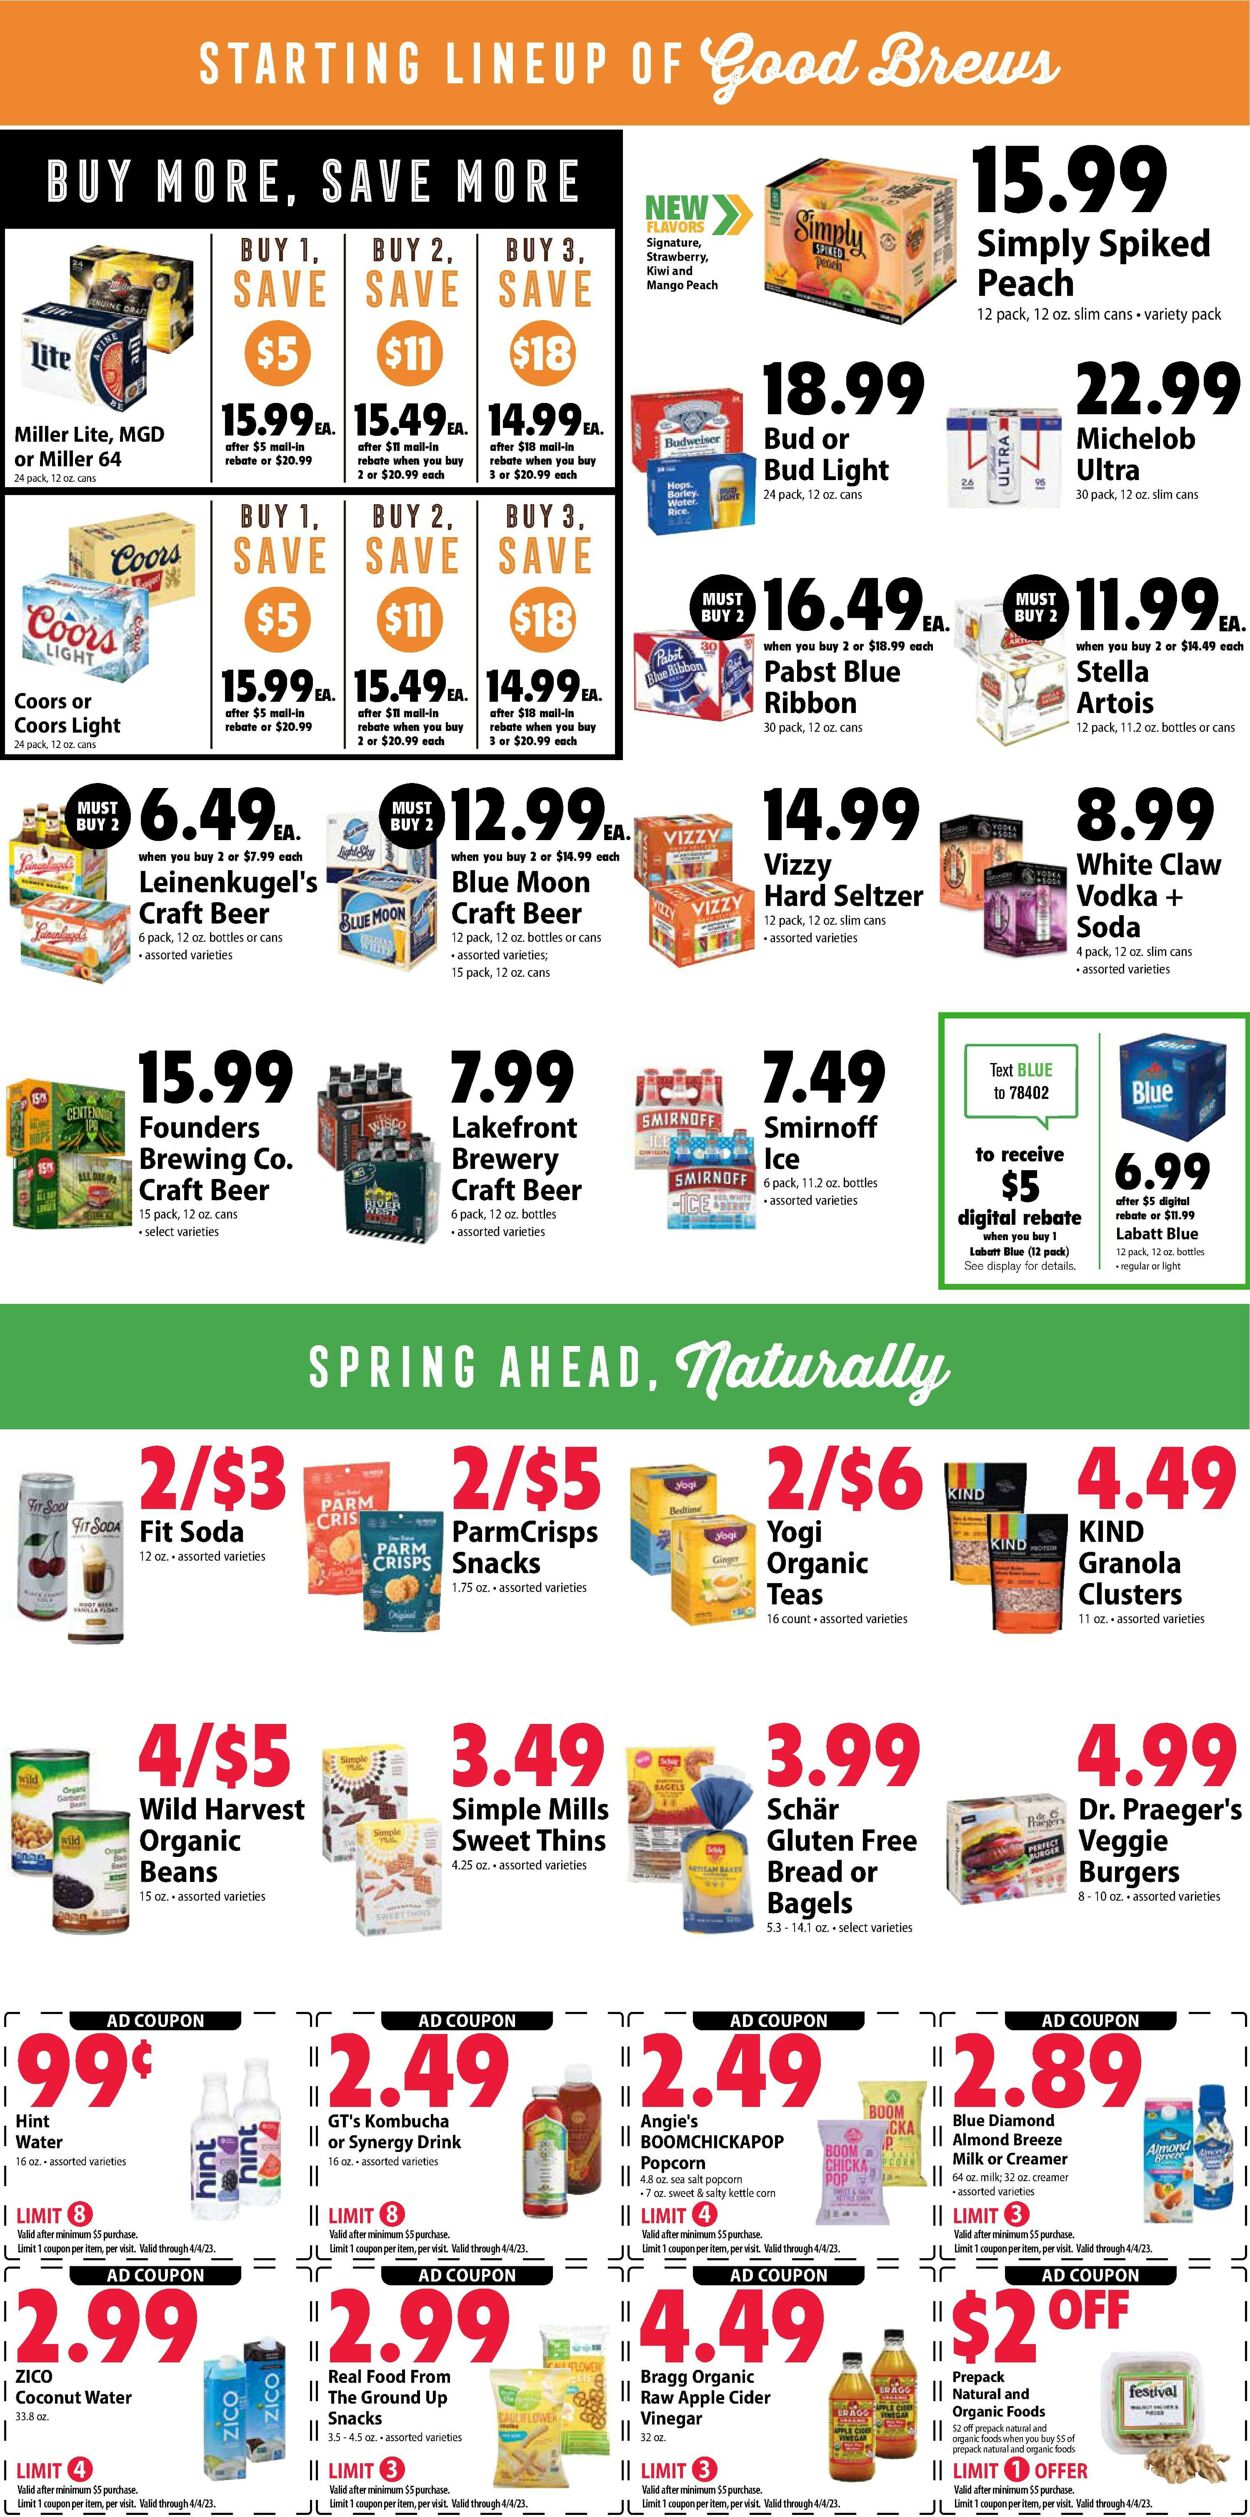 Festival Foods Ad from 03/29/2023